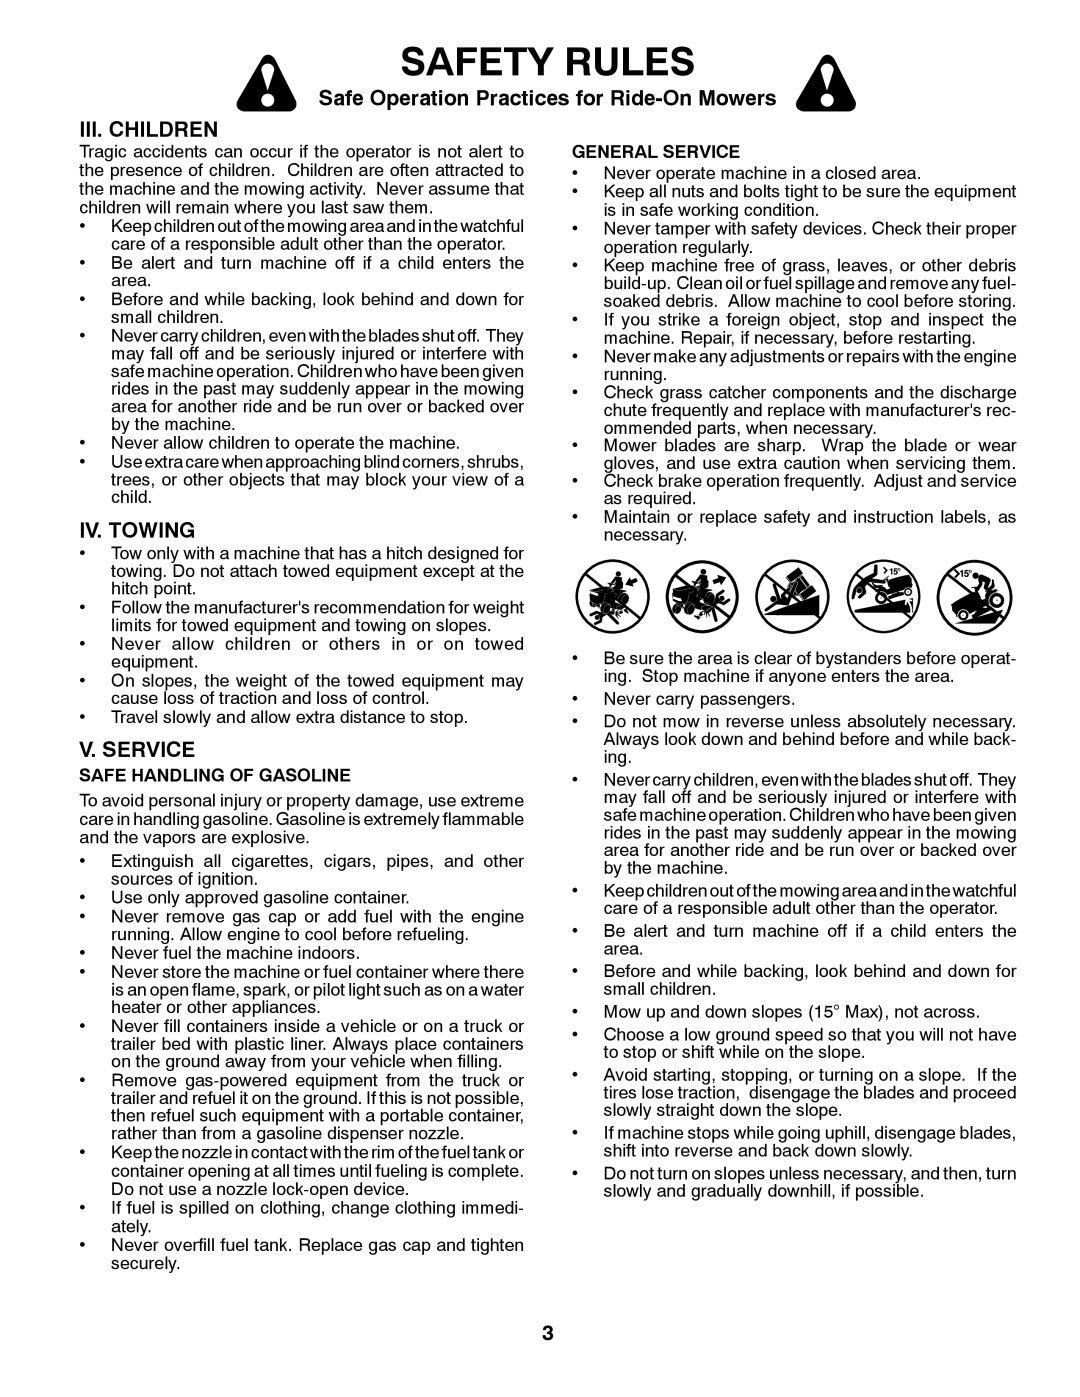 Poulan 96042011101 manual Iii. Children, Iv. Towing, V. Service, Safety Rules, Safe Operation Practices for Ride-On Mowers 